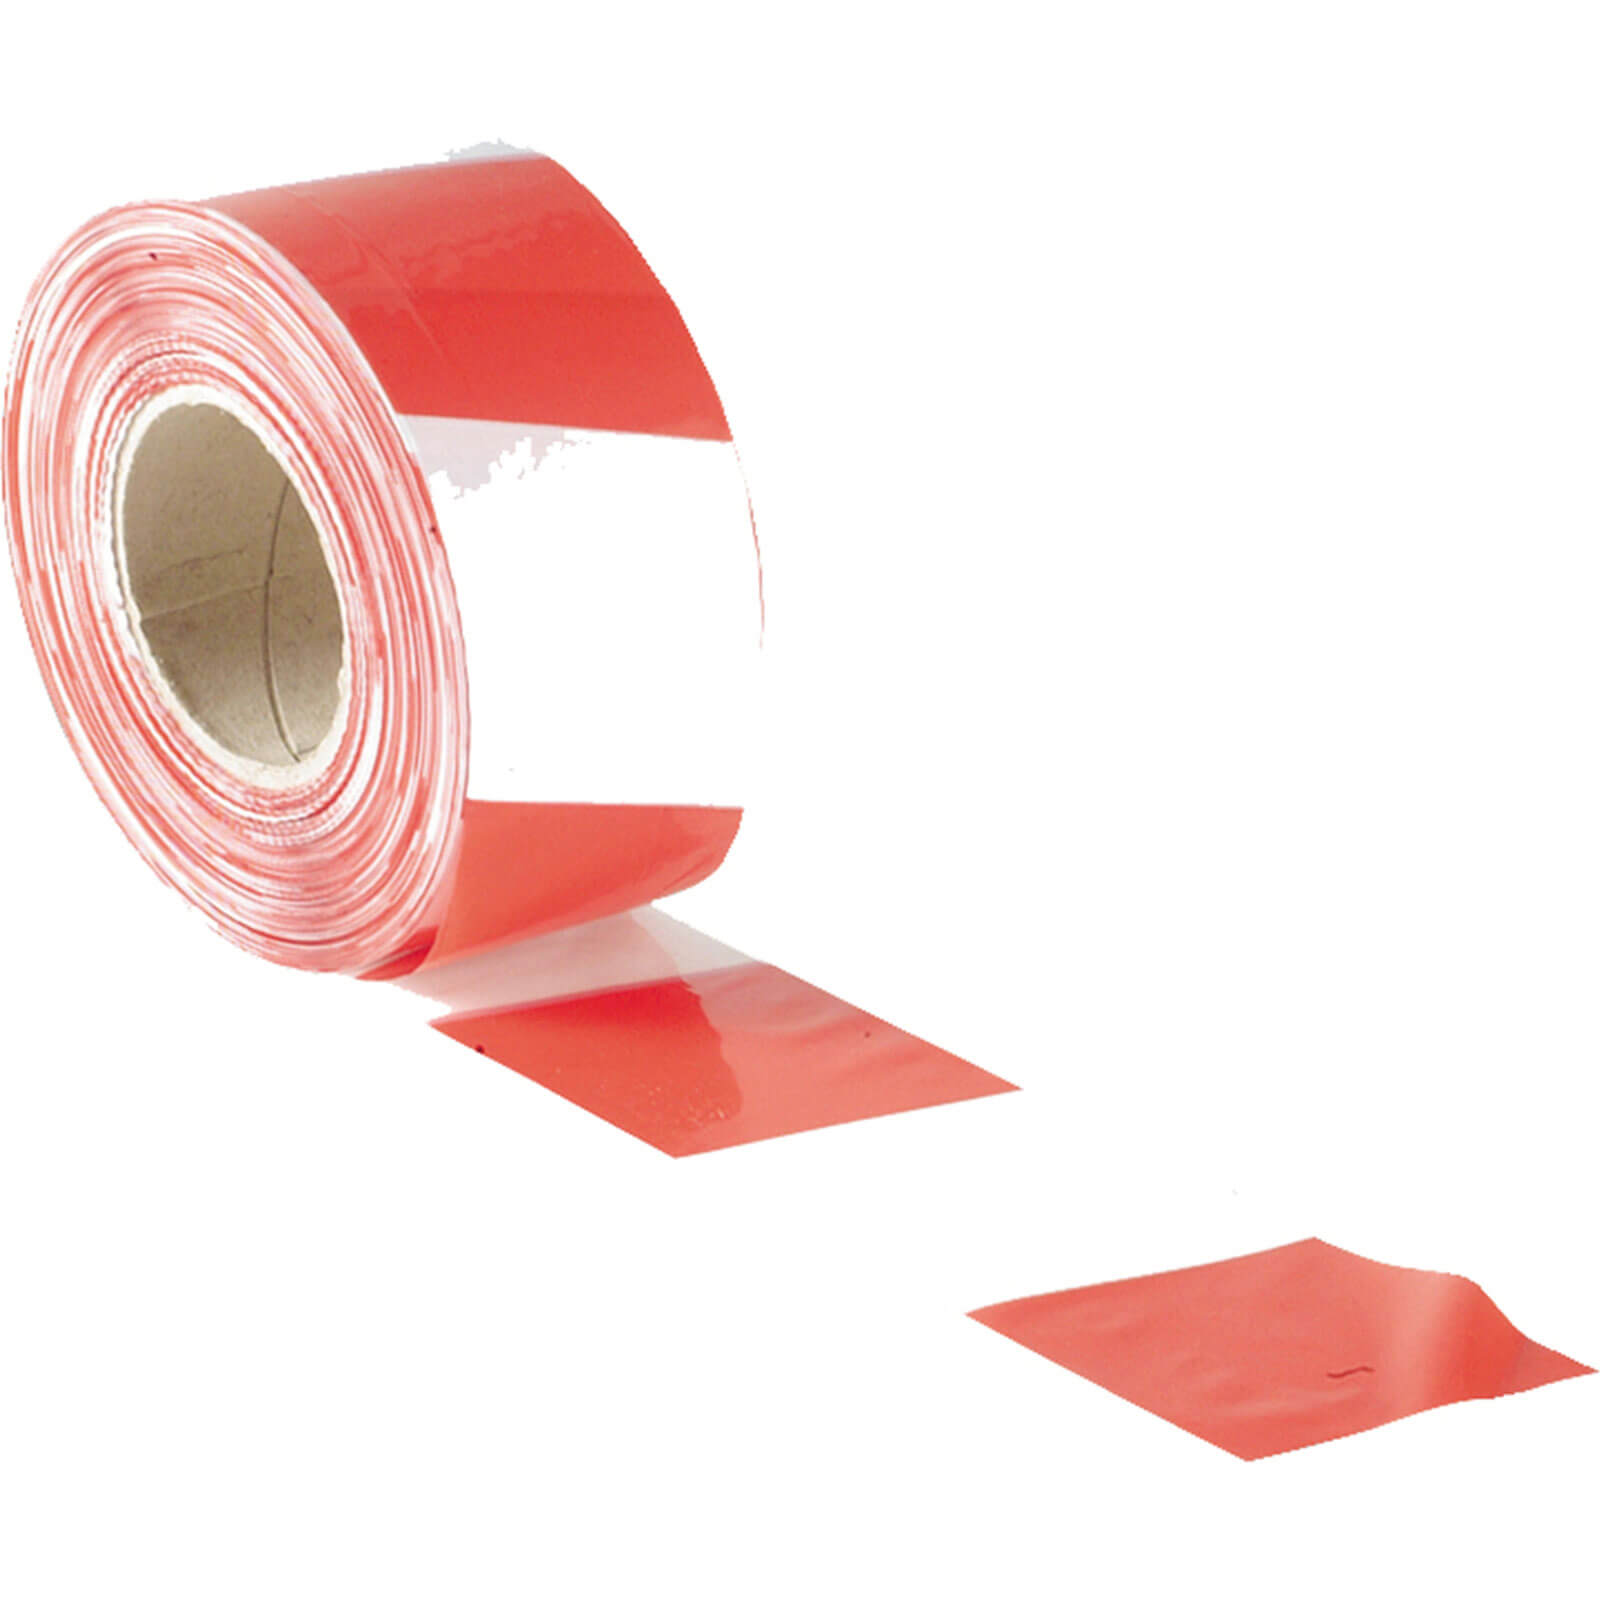 Barrier Tape Red / White Stripe 70mm Wide x 500m Roll